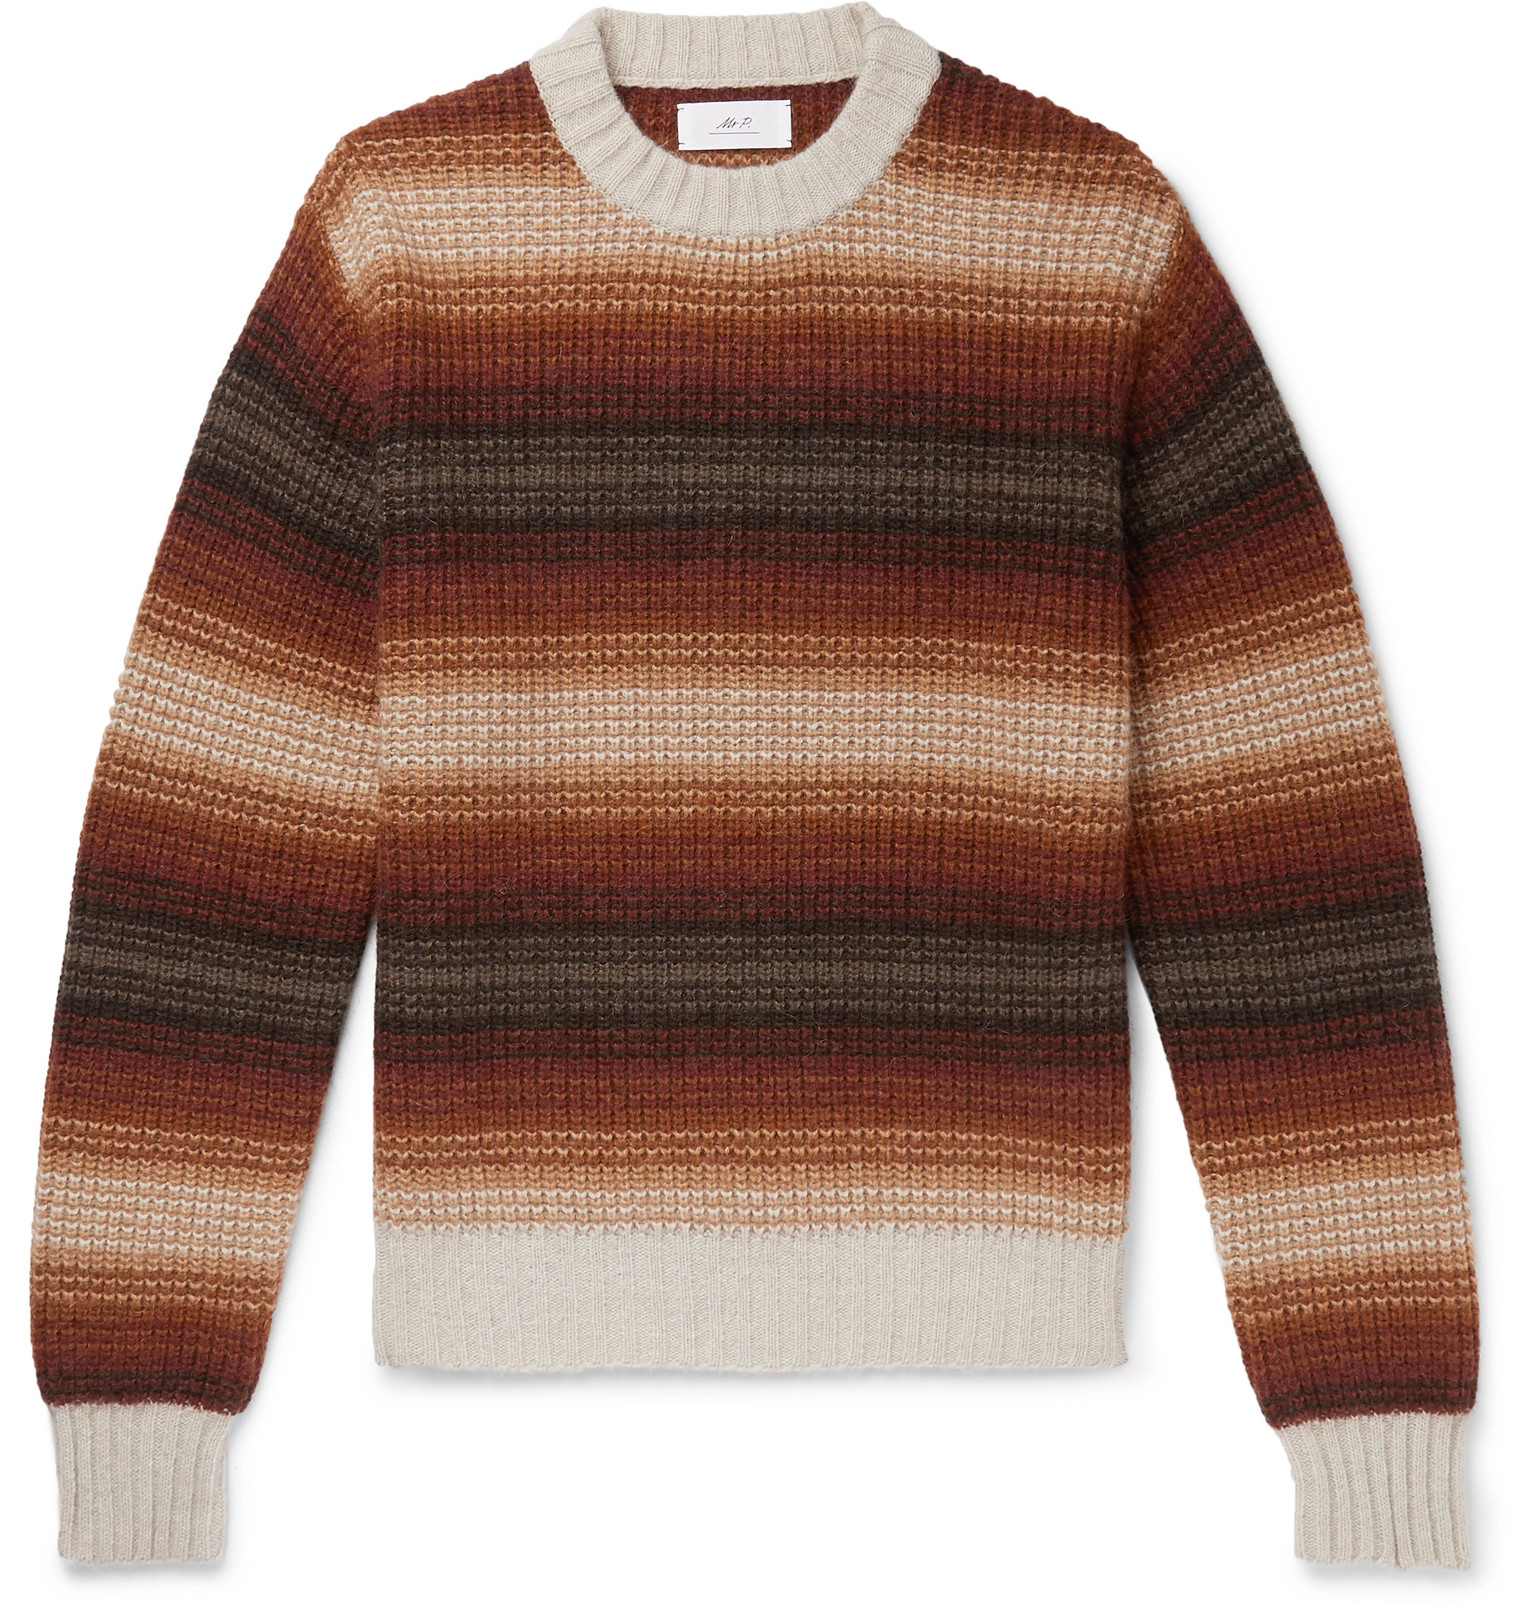 Mr P. - Striped Knitted Sweater - Men - Brown | The Fashionisto